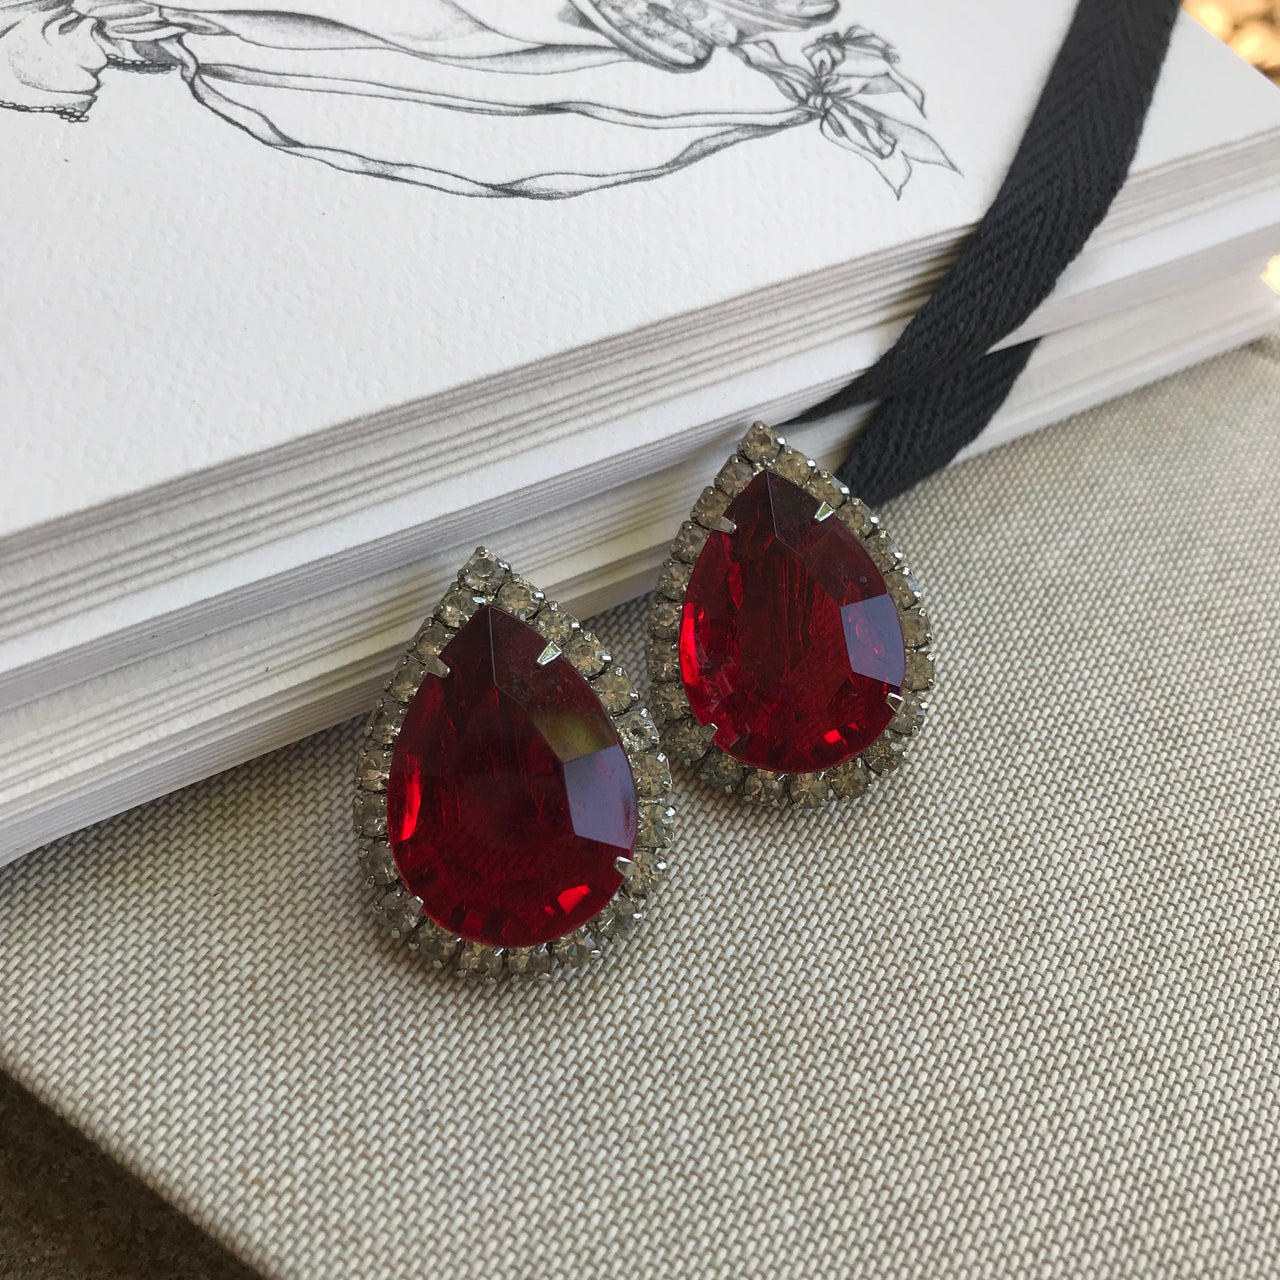 Red Pear Shaped Rhinestone Earrings Jewelry Bloomers and Frocks 